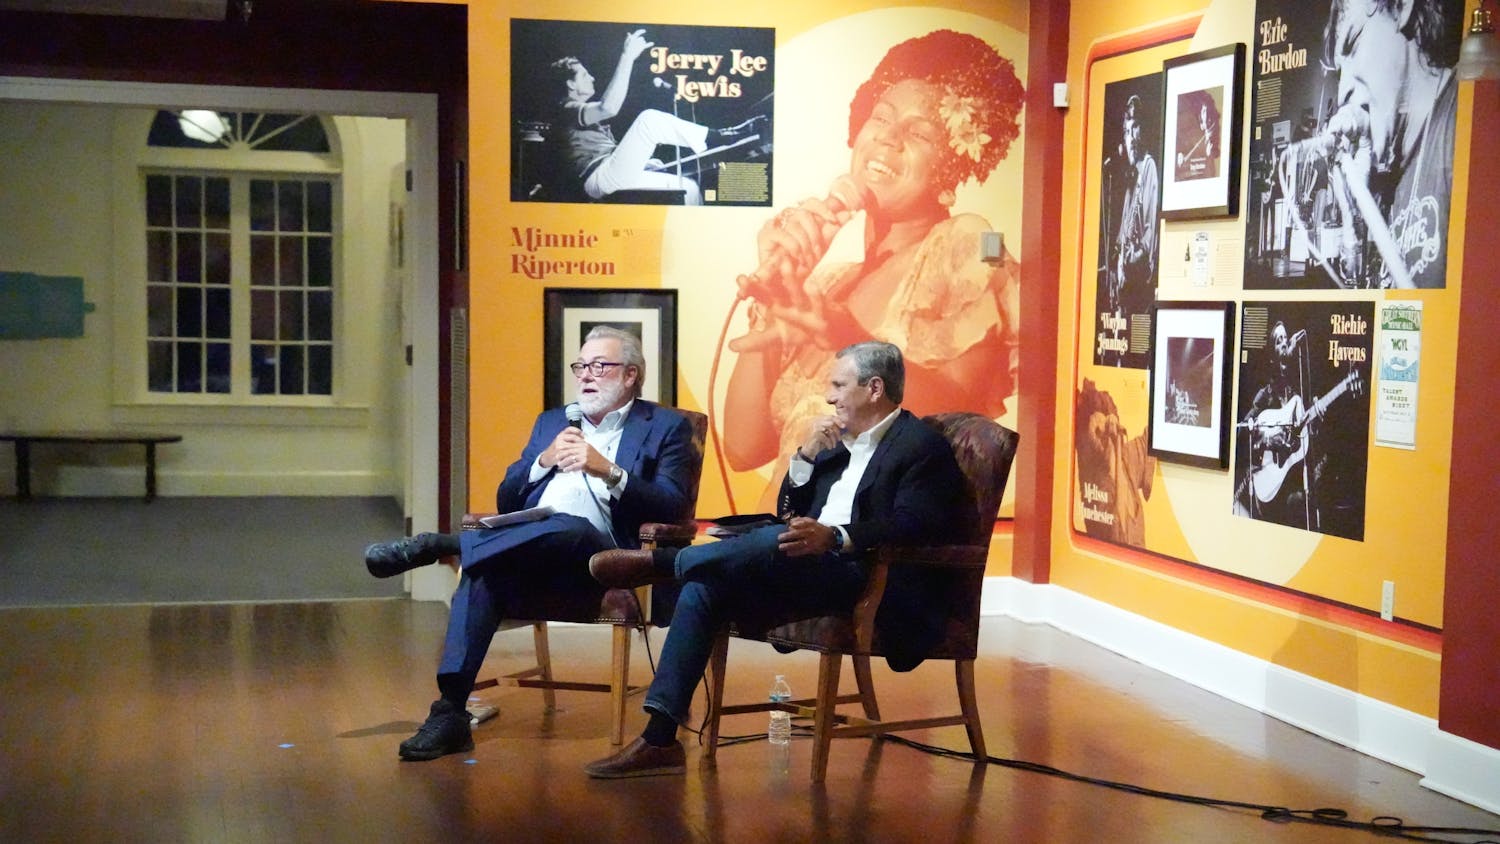 Authors David Powell and Mario Cartaya (left to right), interviewed each other at the Matheson History Museum about their individual books on Cuban exile experiences Wednesday, Sept. 20, 2023.